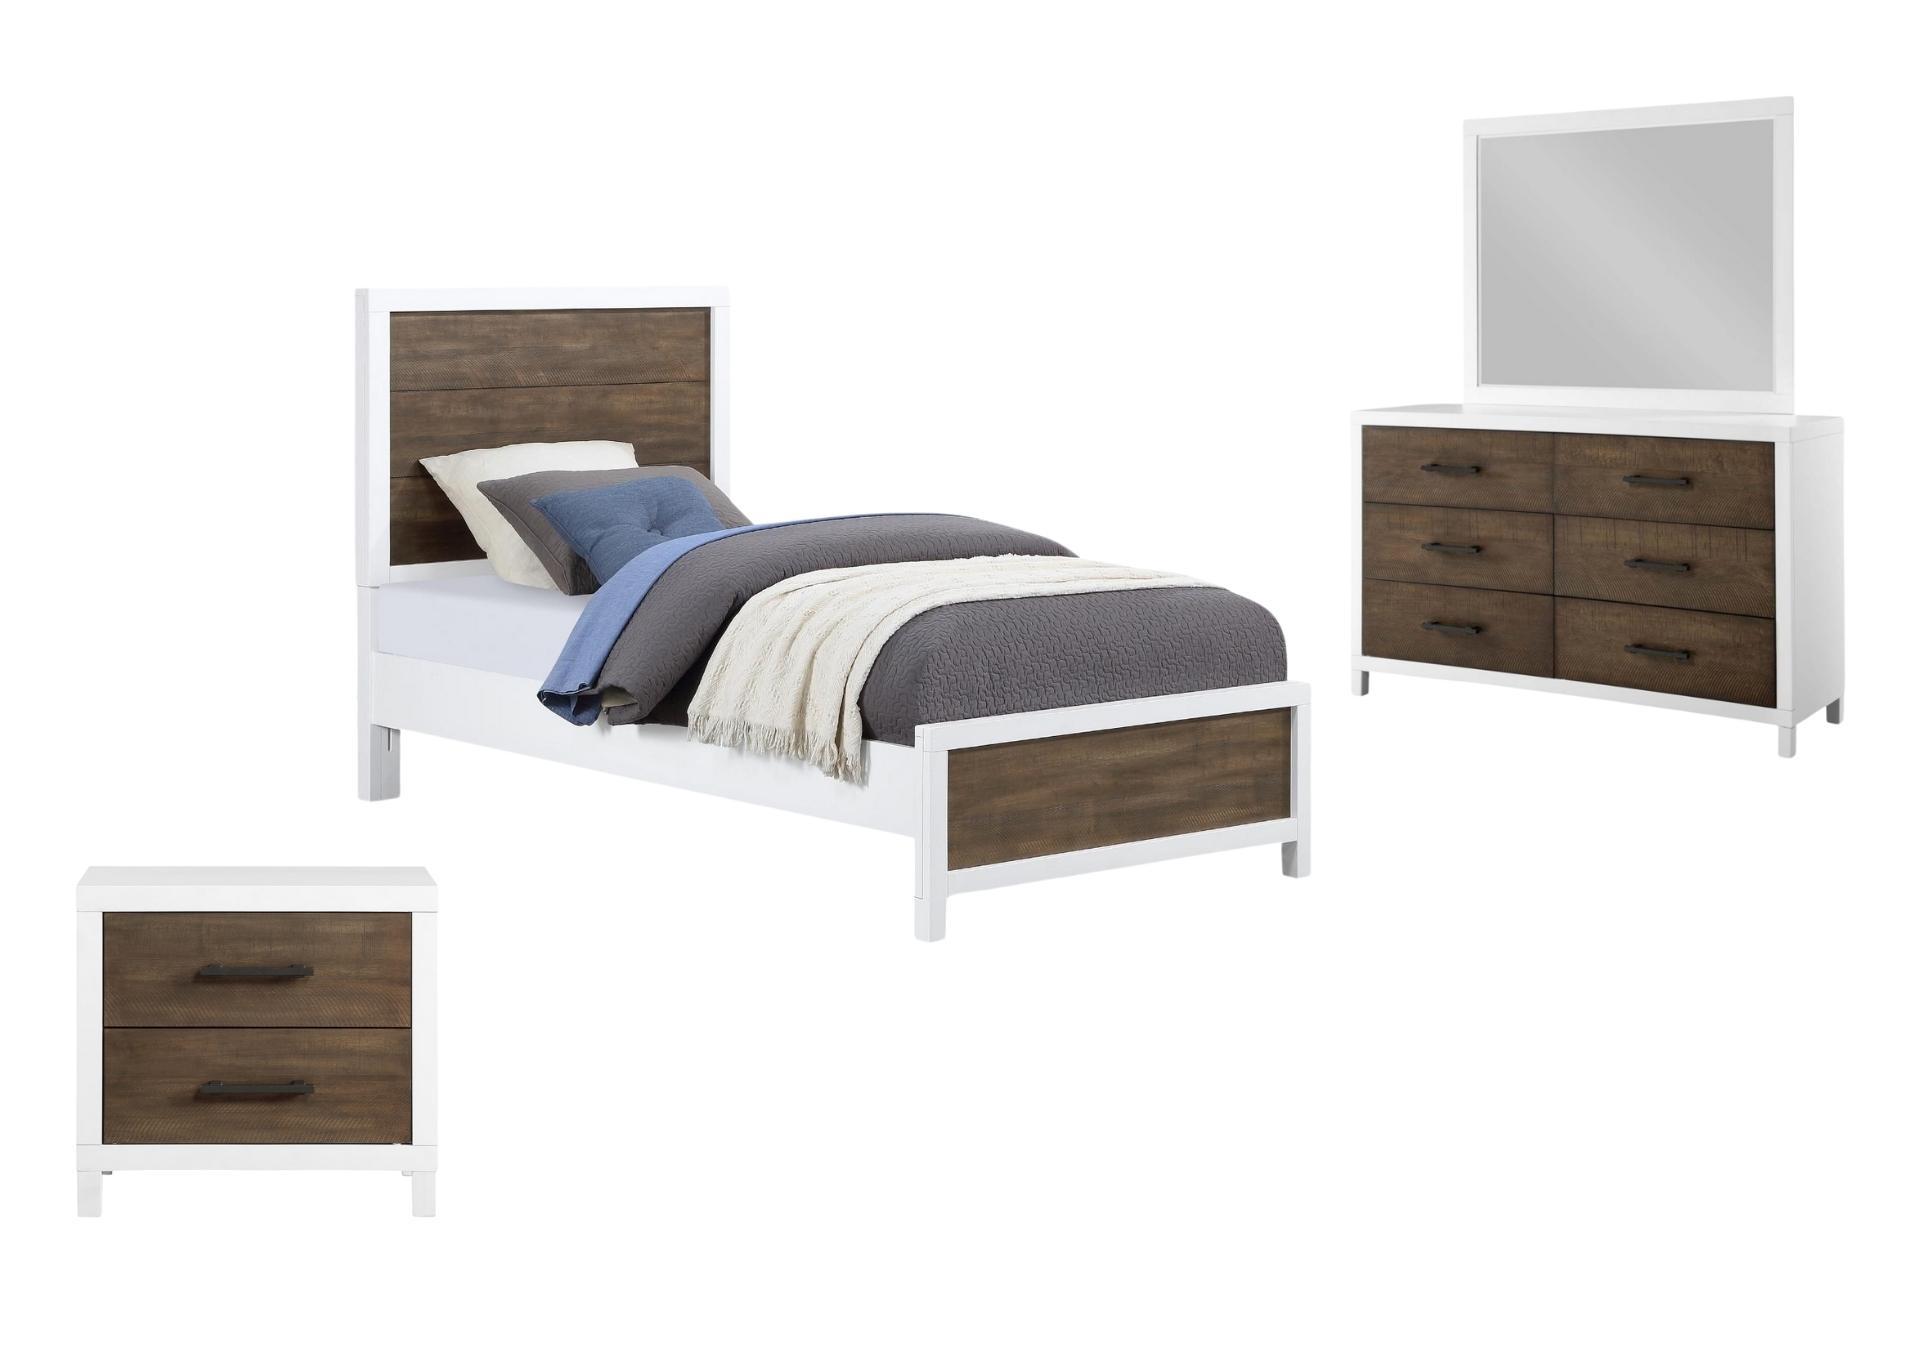 DAUGHTREY WHITE TWIN PANEL BEDROOM,AUSTIN GROUP